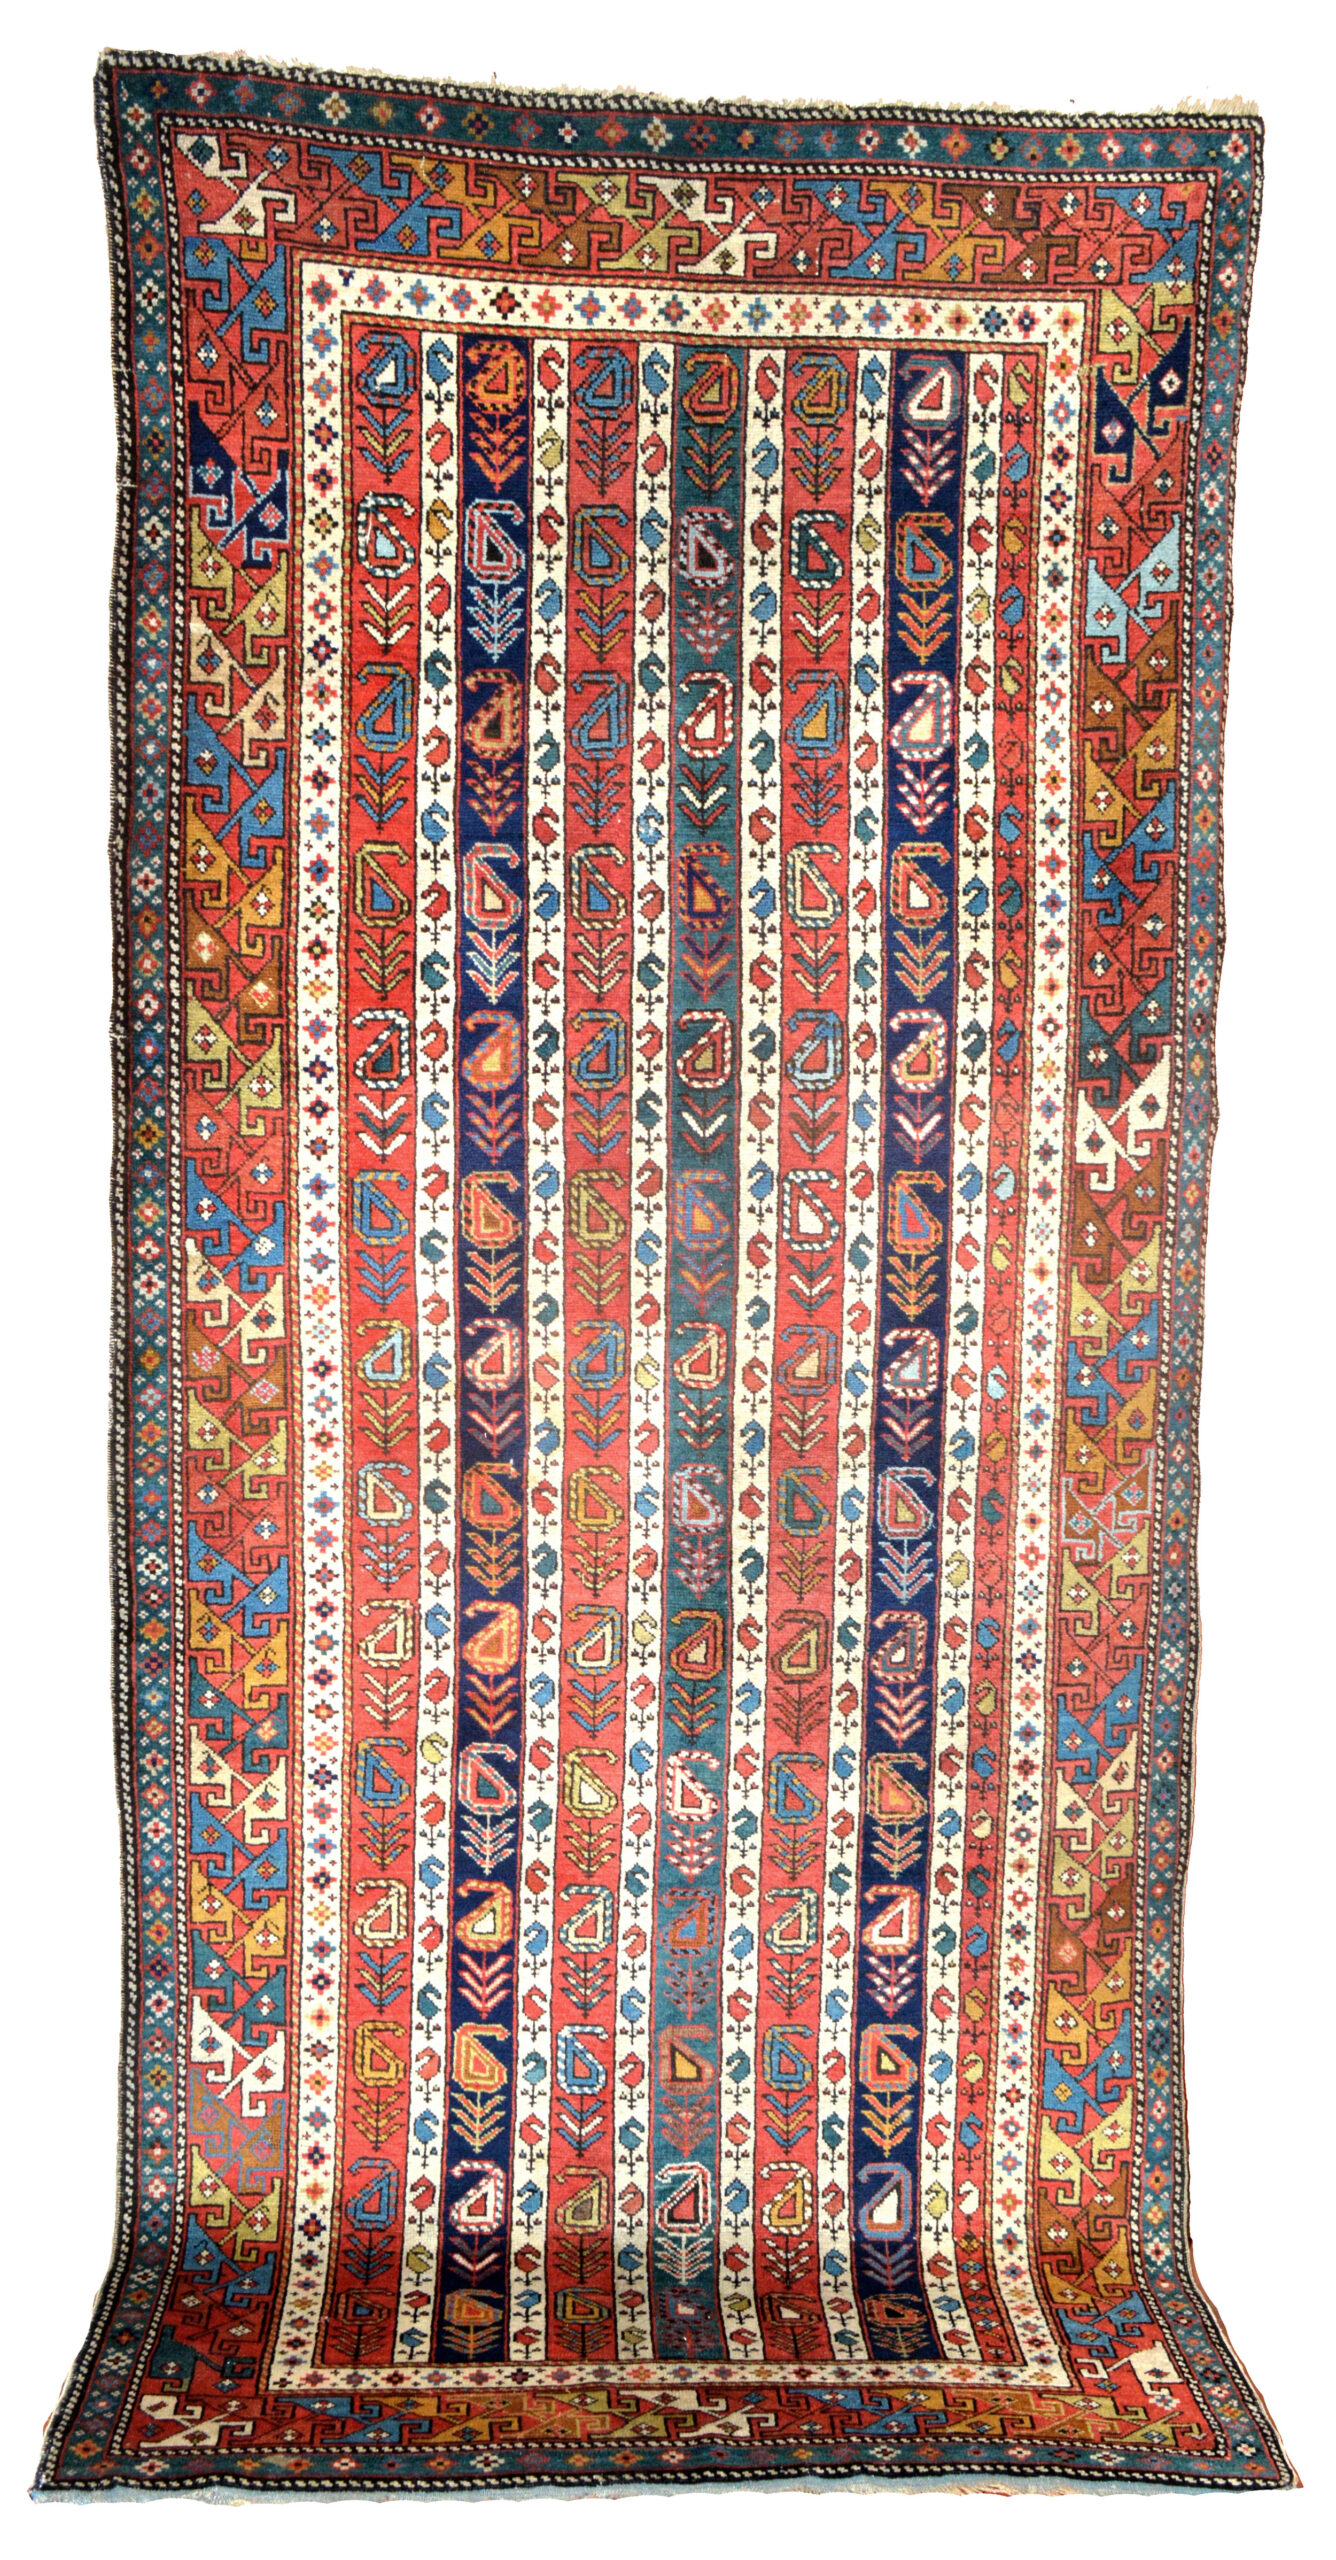 Antique Caucasian Shirvan rug with polychromatic vertical stripes decorated with Both (Paisley shaped motifs), late 19th century, northeast Caucasus - Douglas Stock Gallery antique Oriental rugs Boston,MA area, antique rugs Brookline, Cambridge, Belmont, Lexington, Concord, Weston, Wellesley, Dover, South Natick,Ma area, antique Caucasian rugs New England